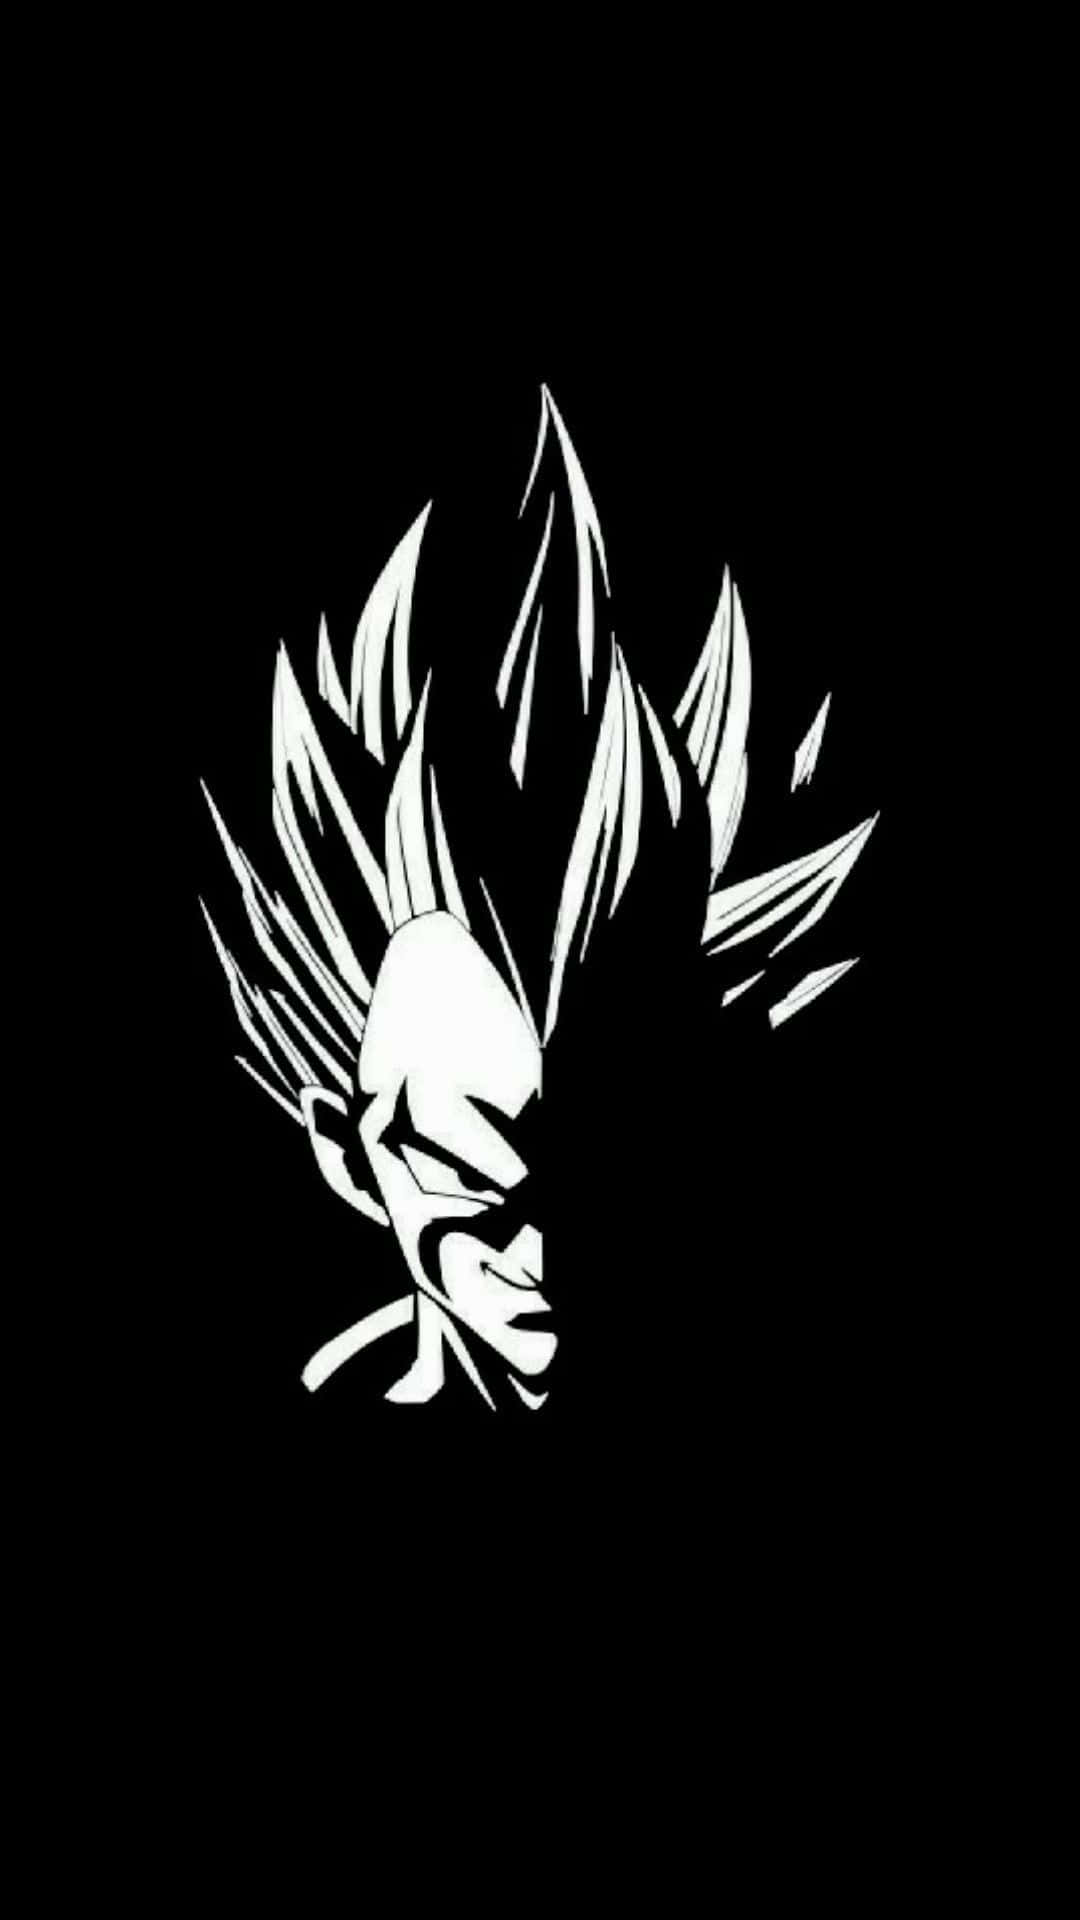 "The Prince of All Saiyans, Vegeta, in Black and White" Wallpaper